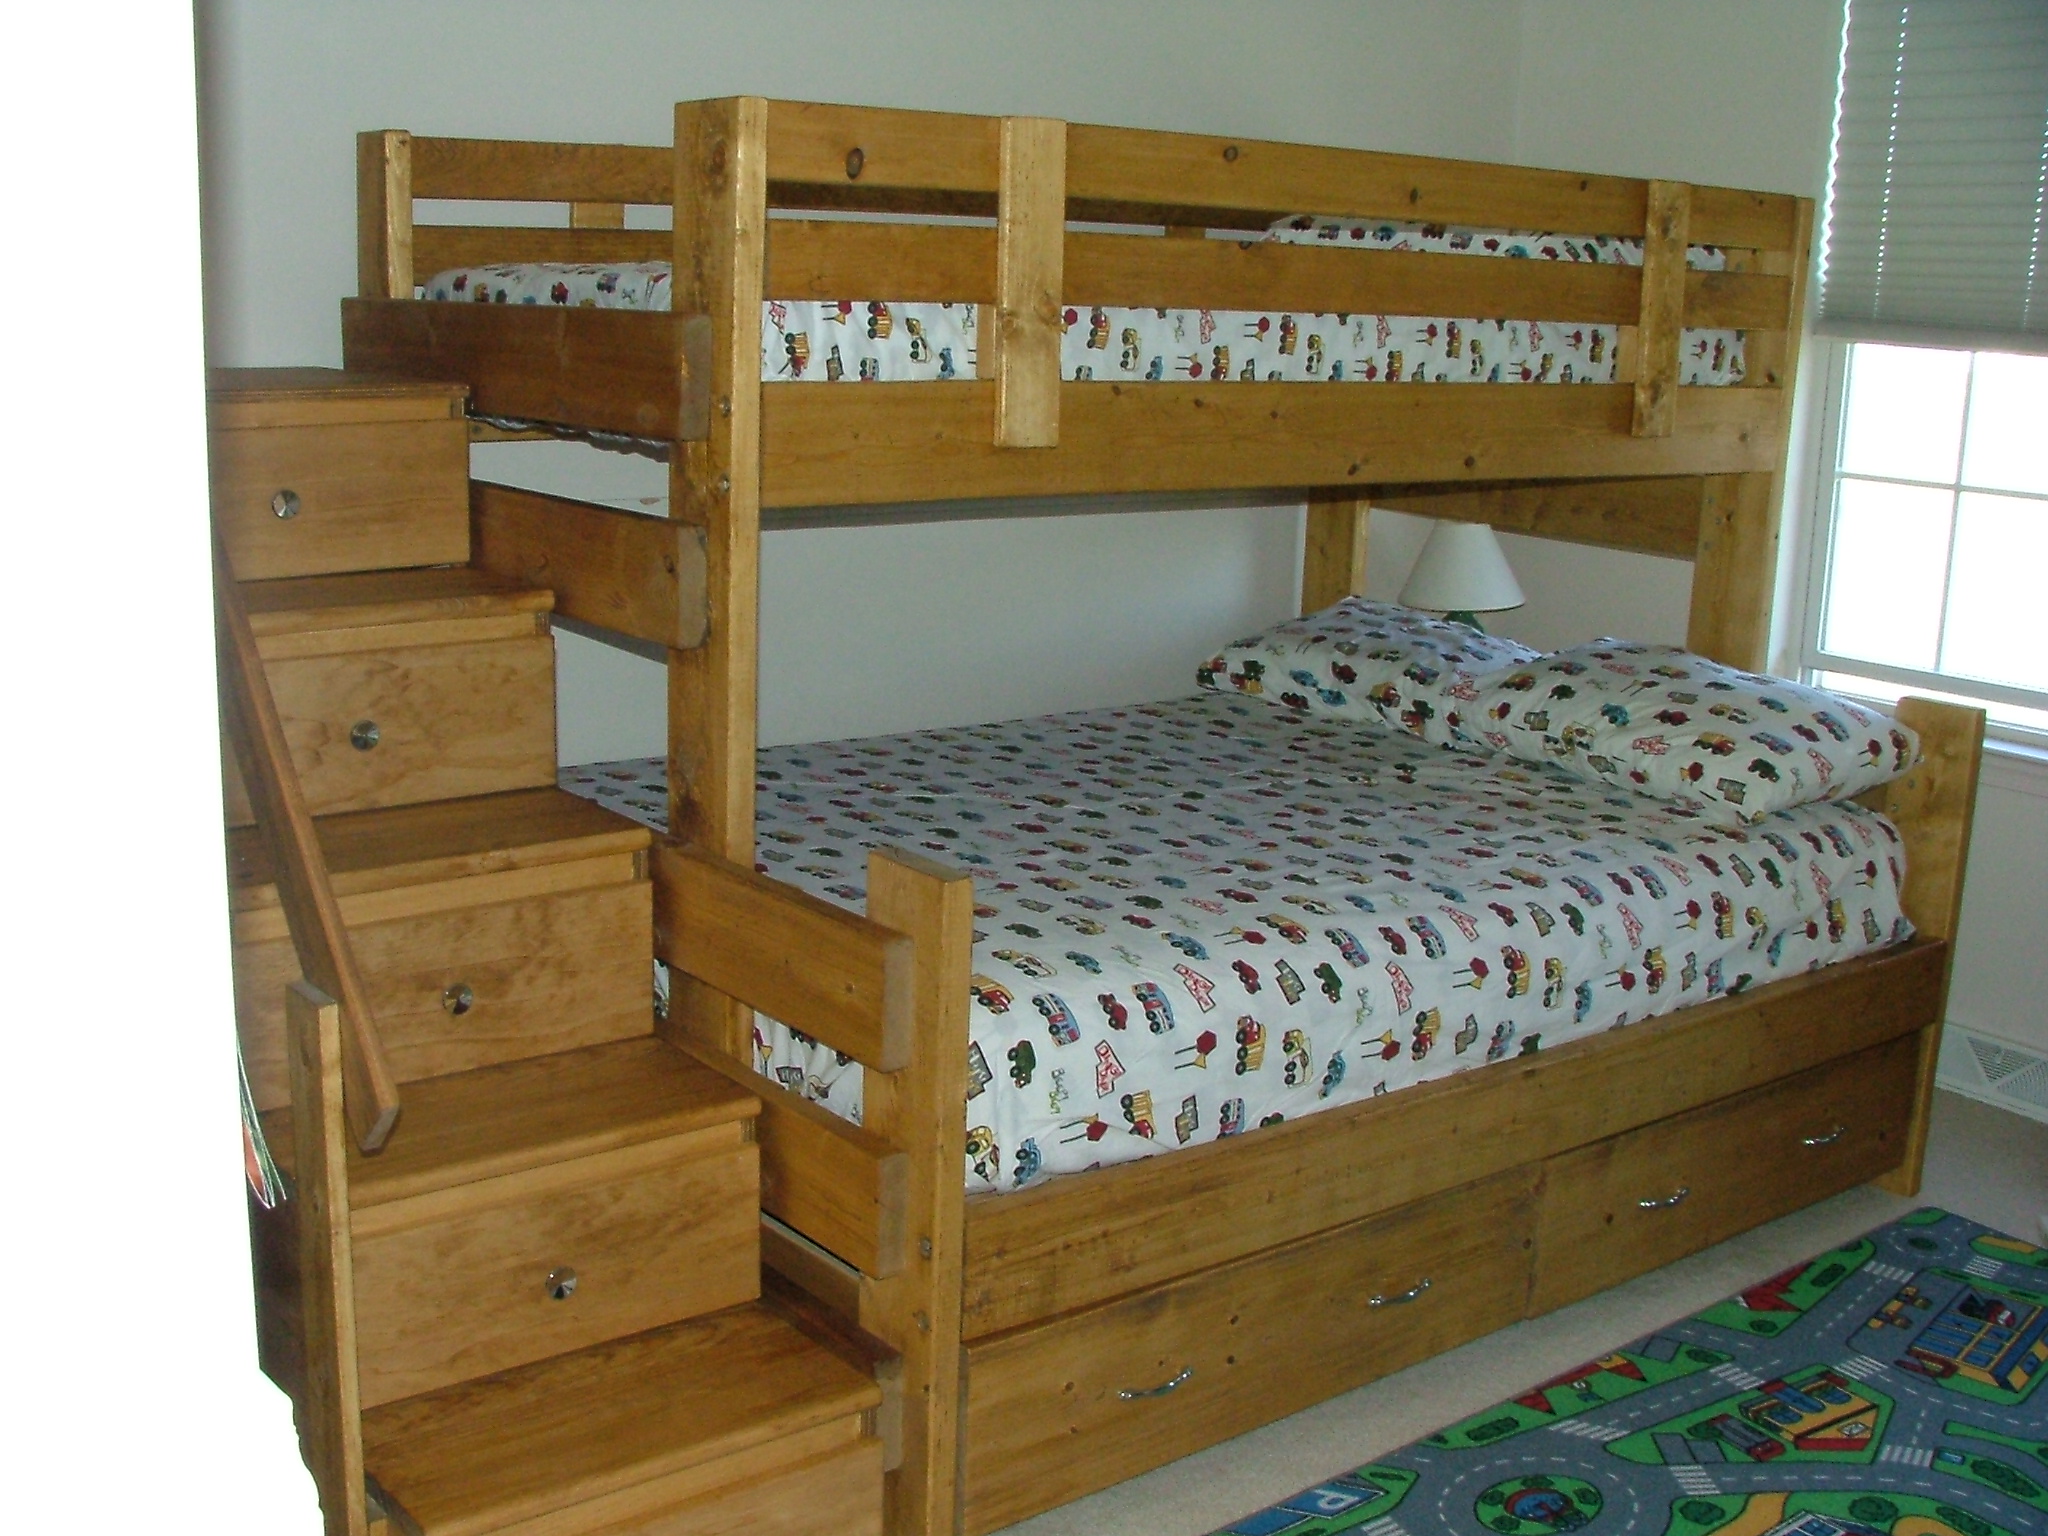 Full Bed Furniture Woodworking Plans, Bunk Bed Building Plans